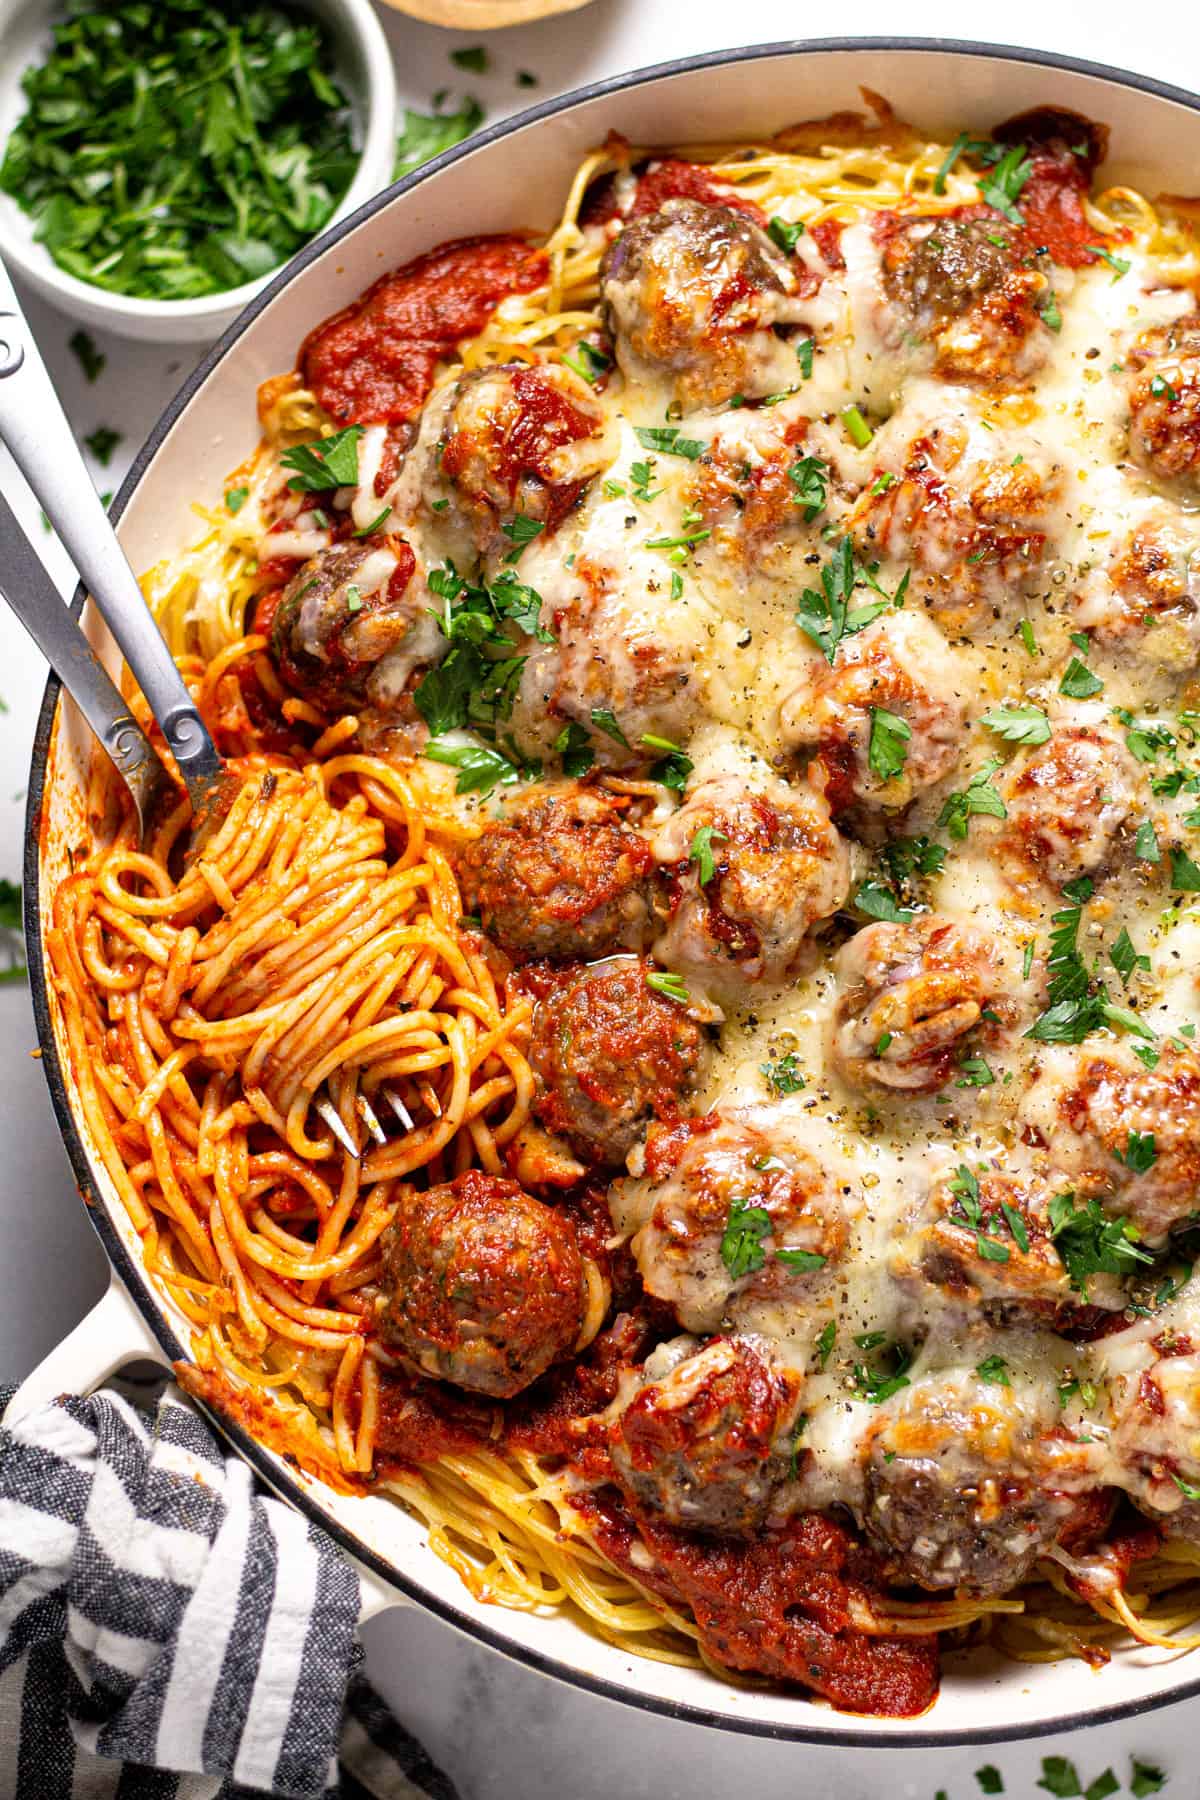 Baked Spaghetti And Meatballs Midwest Foodie